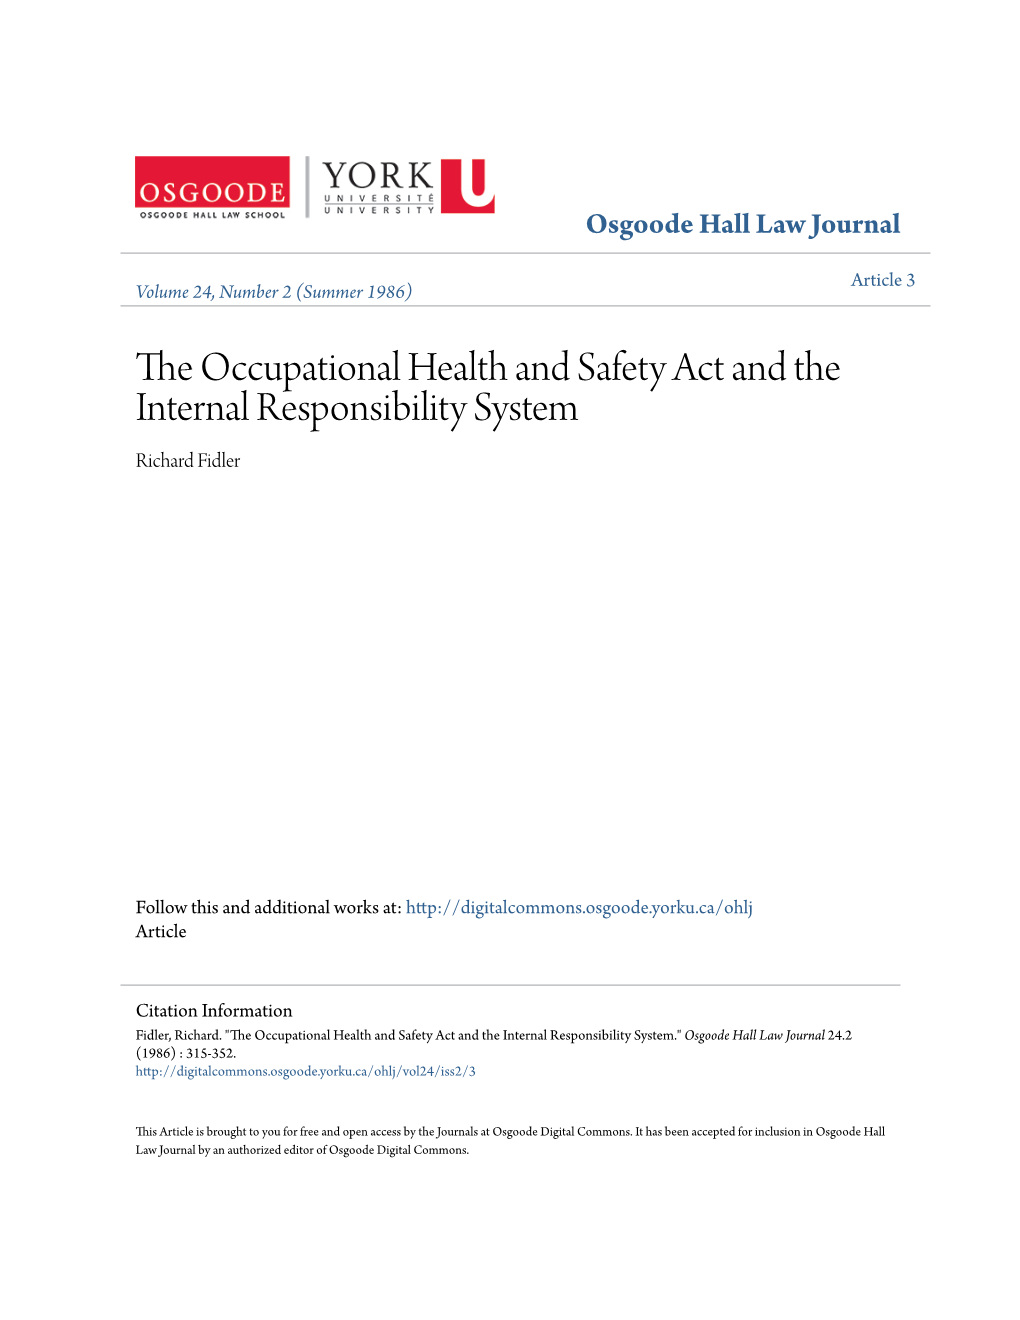 The Occupational Health and Safety Act and the Internal Responsibility System